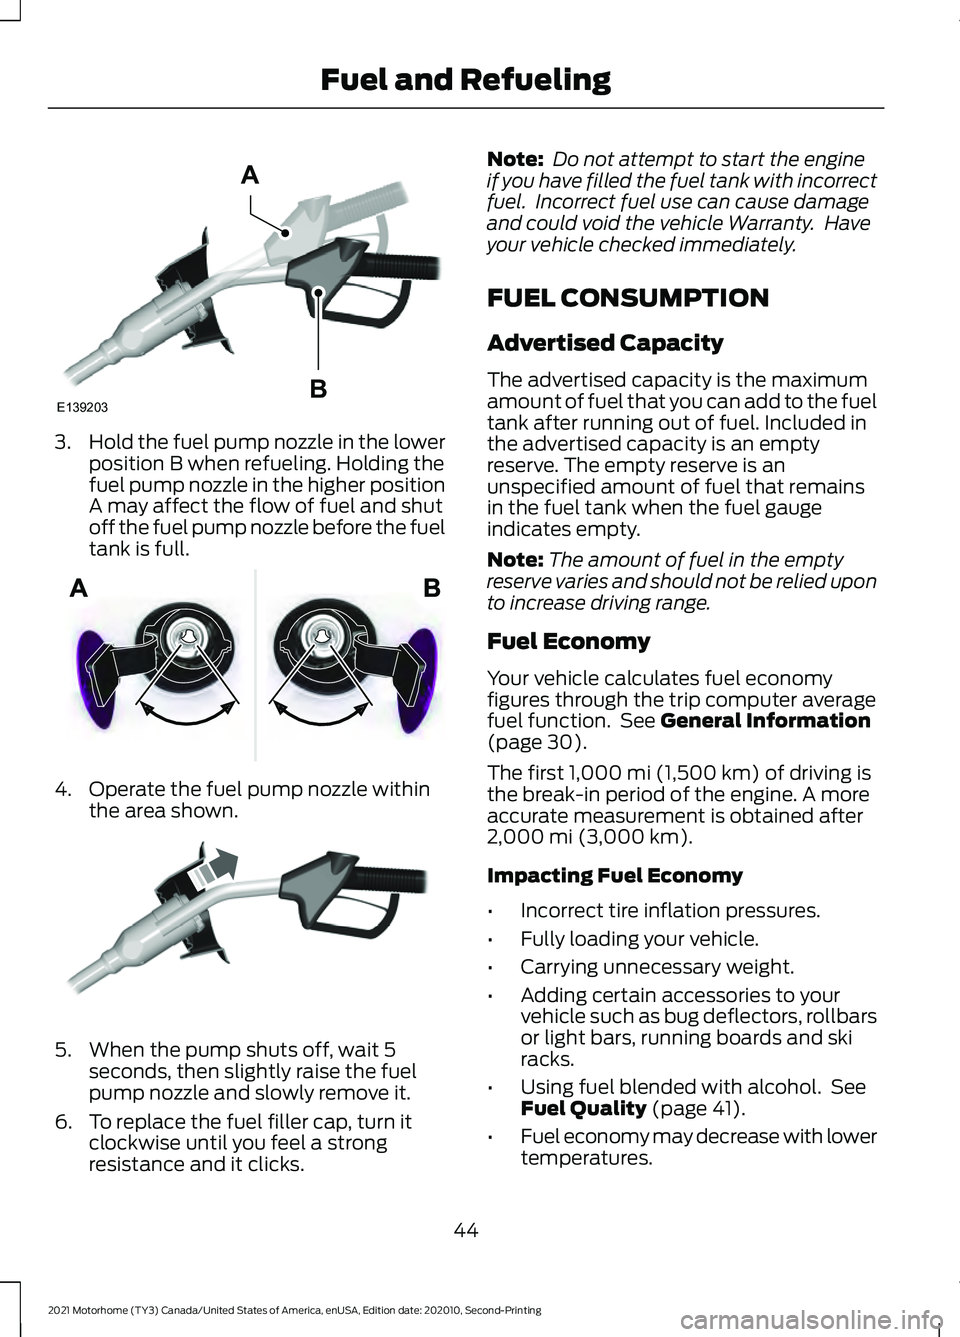 FORD F-53 2021  Owners Manual 3.
Hold the fuel pump nozzle in the lower
position B when refueling. Holding the
fuel pump nozzle in the higher position
A may affect the flow of fuel and shut
off the fuel pump nozzle before the fuel